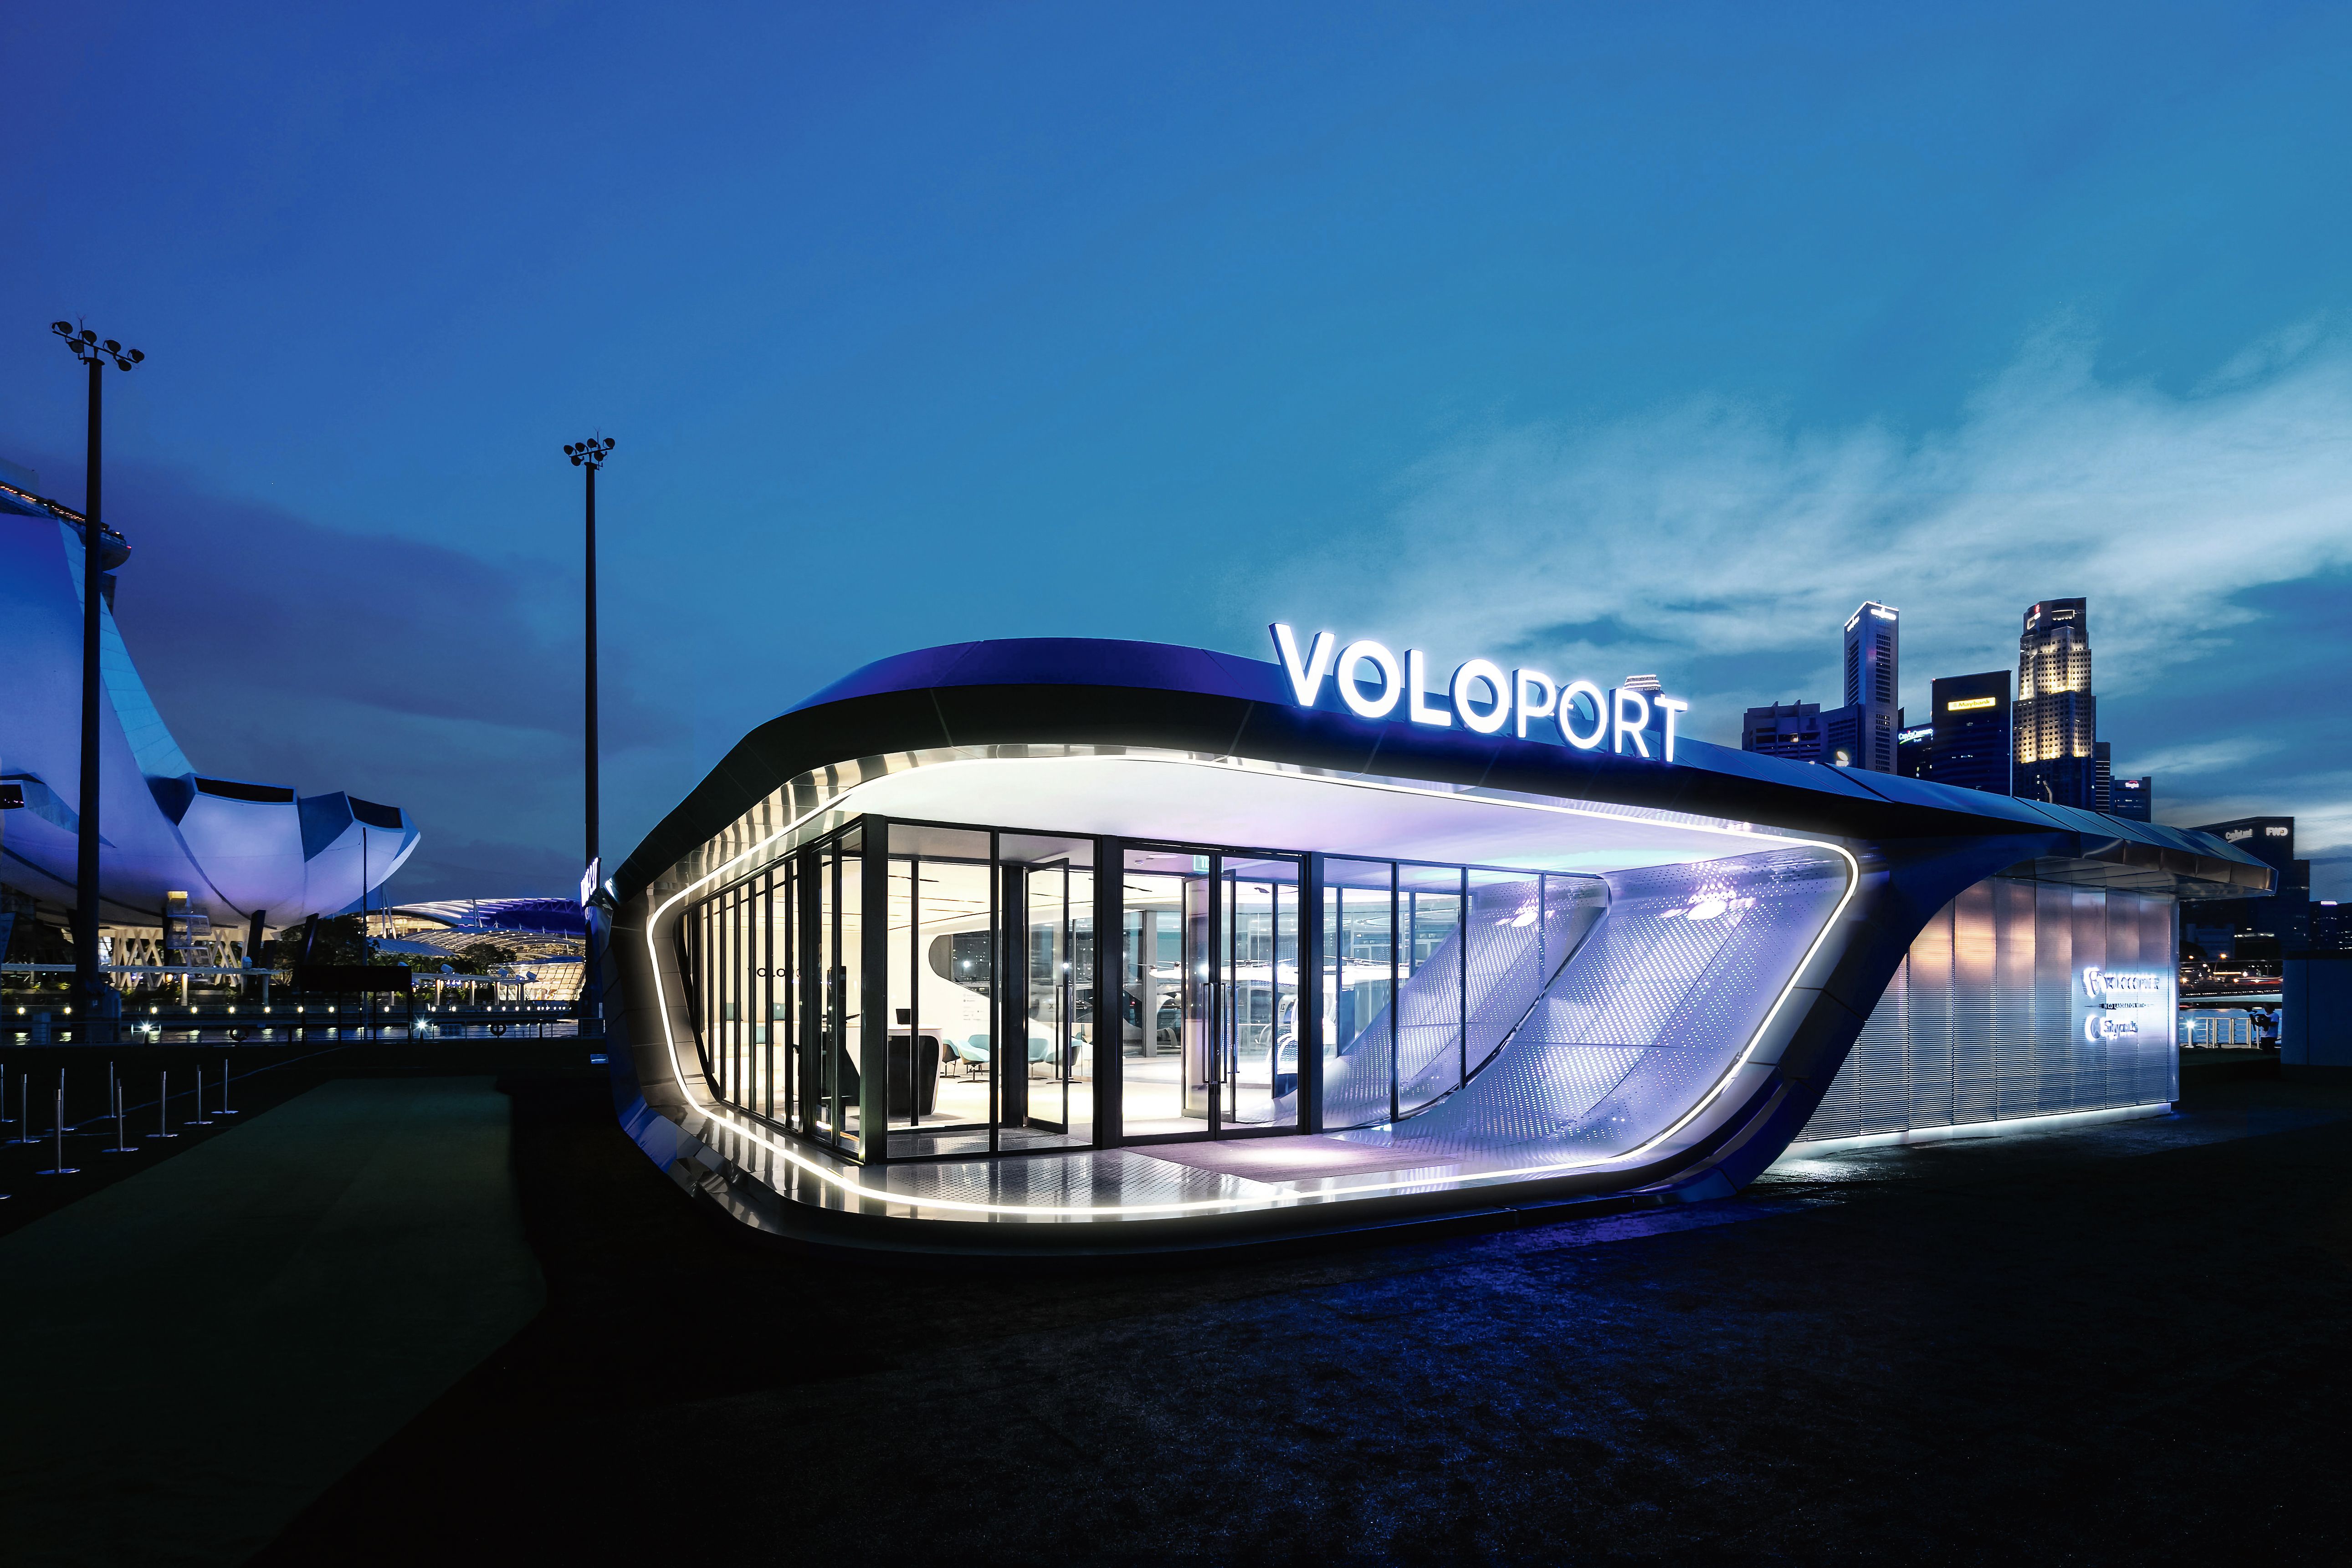 The German air taxi company Volocopter developed the first fully electronic vertical take-off vehicle that flies autonomously and is accordingly ideally suited for use in urban areas. Together with GRAFT and Arup, the Berlin agency GRAFT Brandlab won the design competition for a modular vertiport concept.